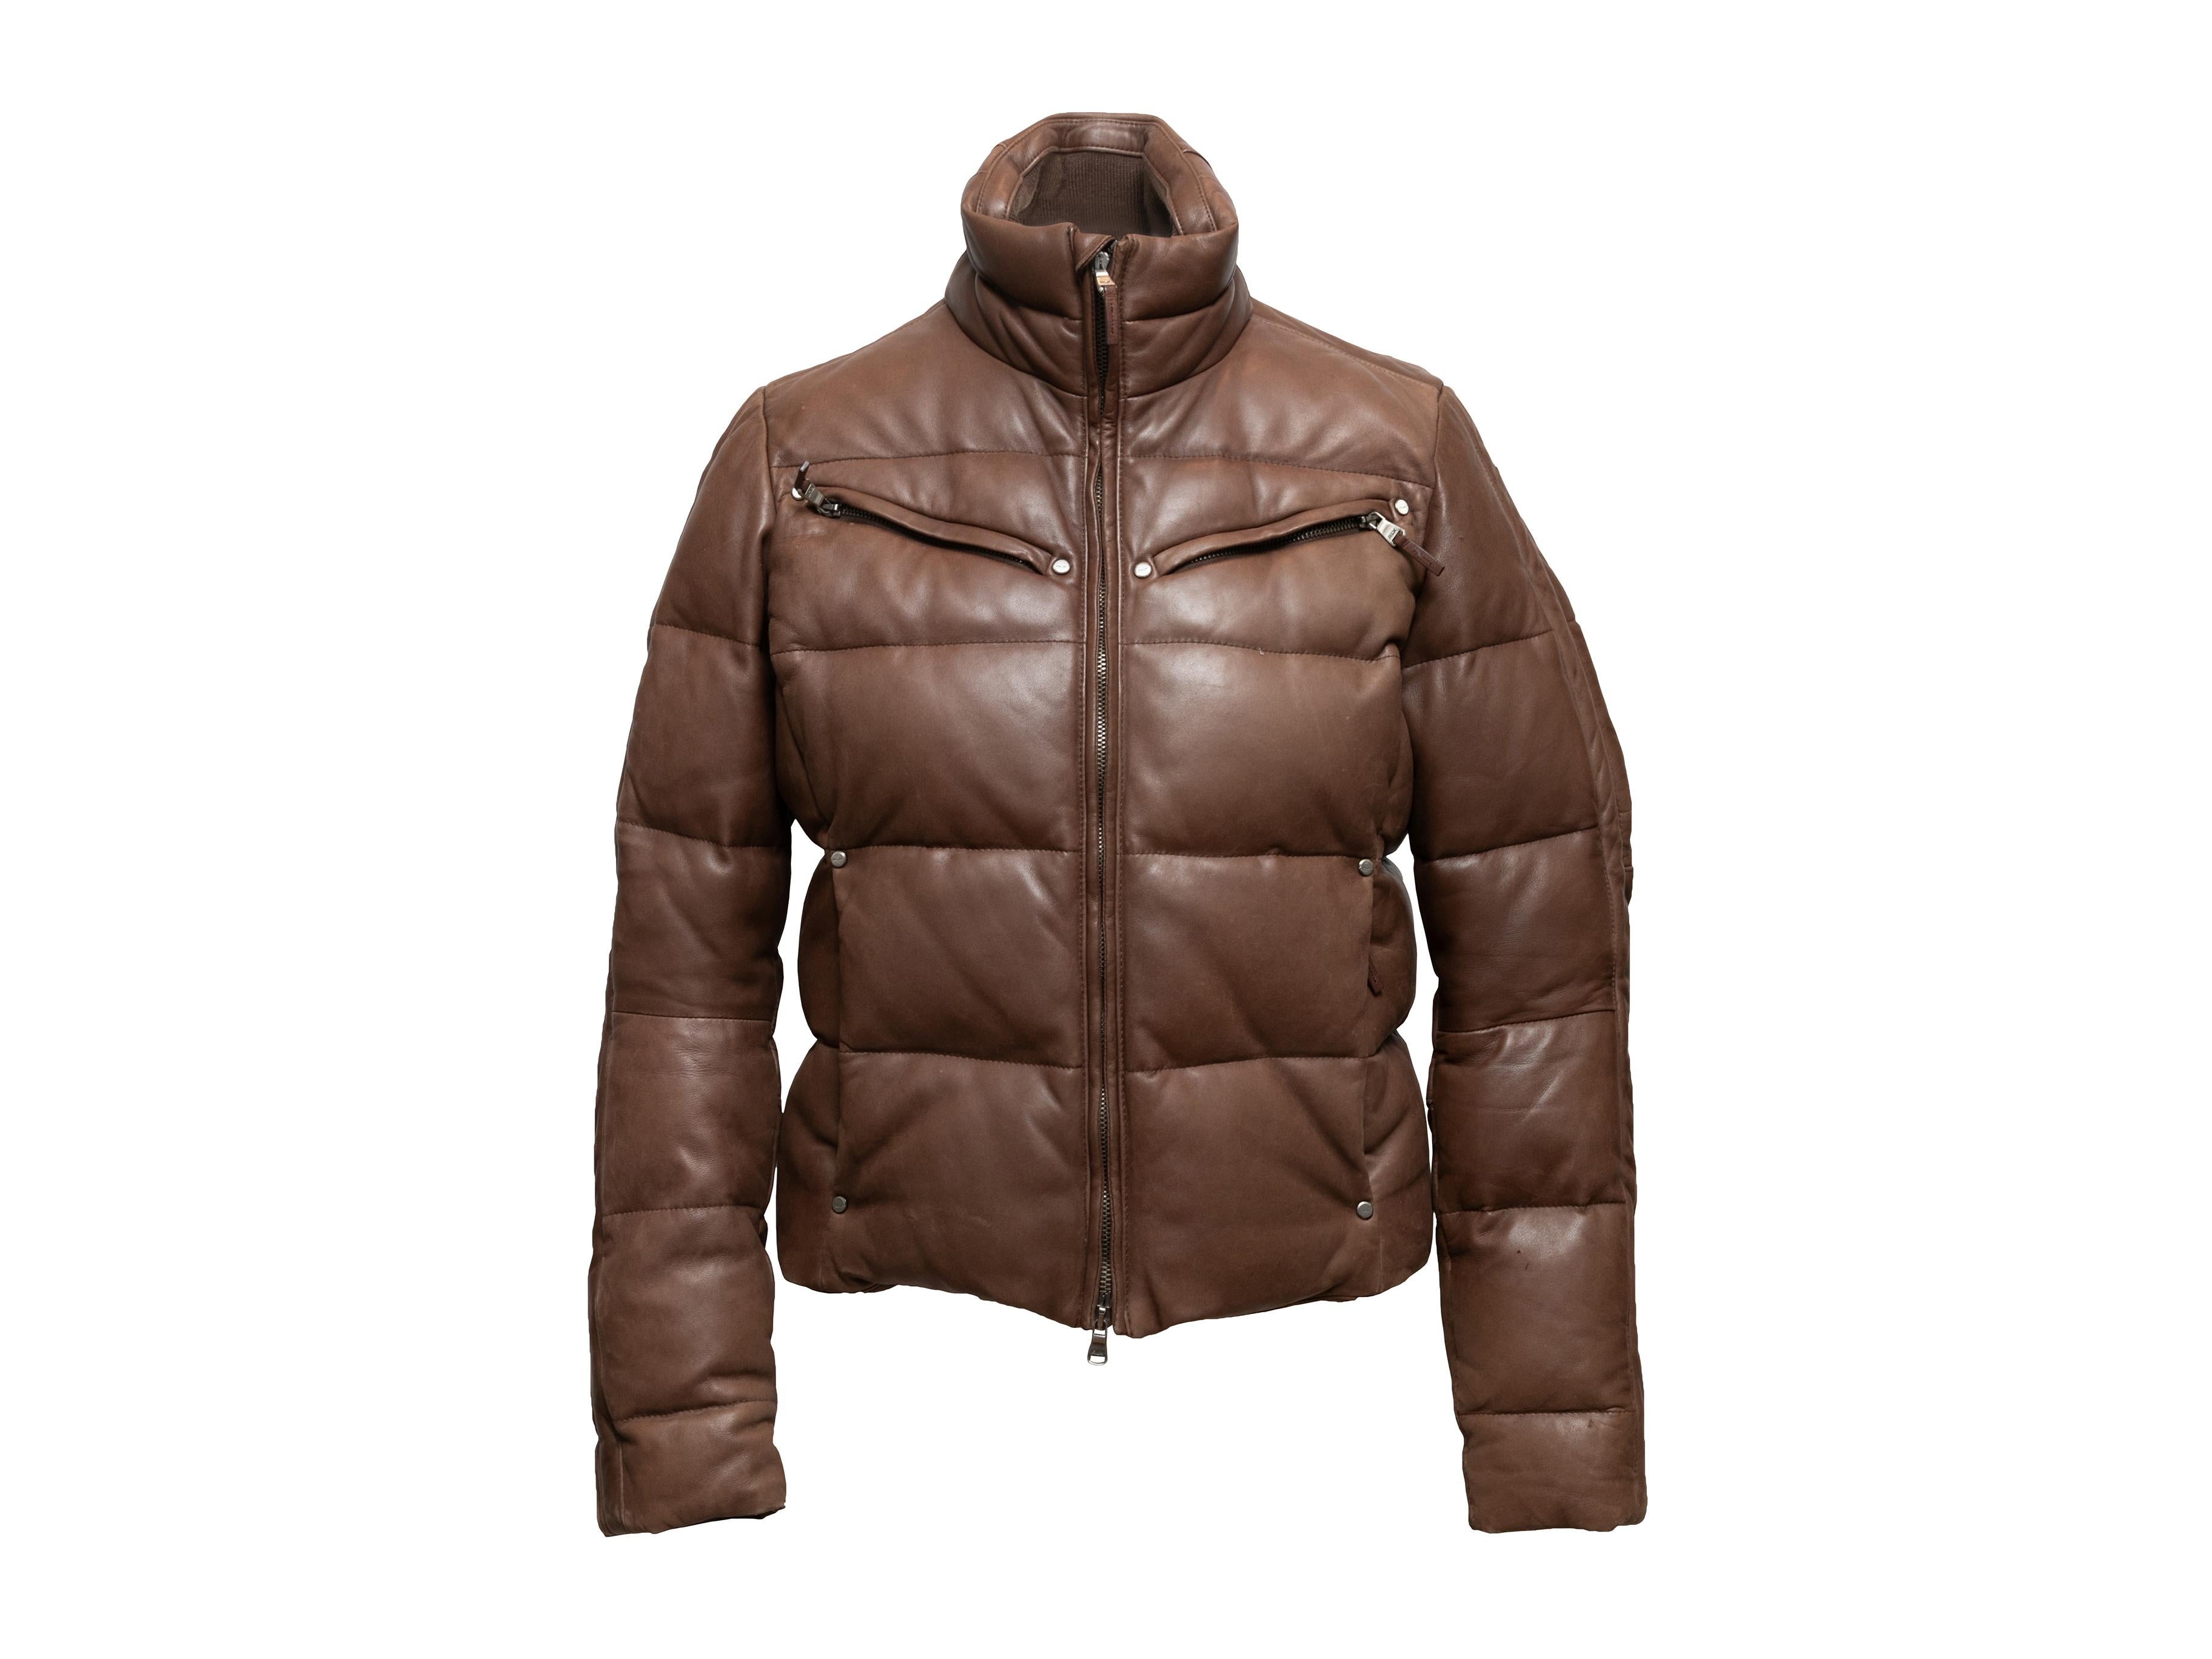 Brown leather down-filled puffer jacket by RLX Ralph Lauren. Stand collar. Four front pockets. Zip closure at center front. 36